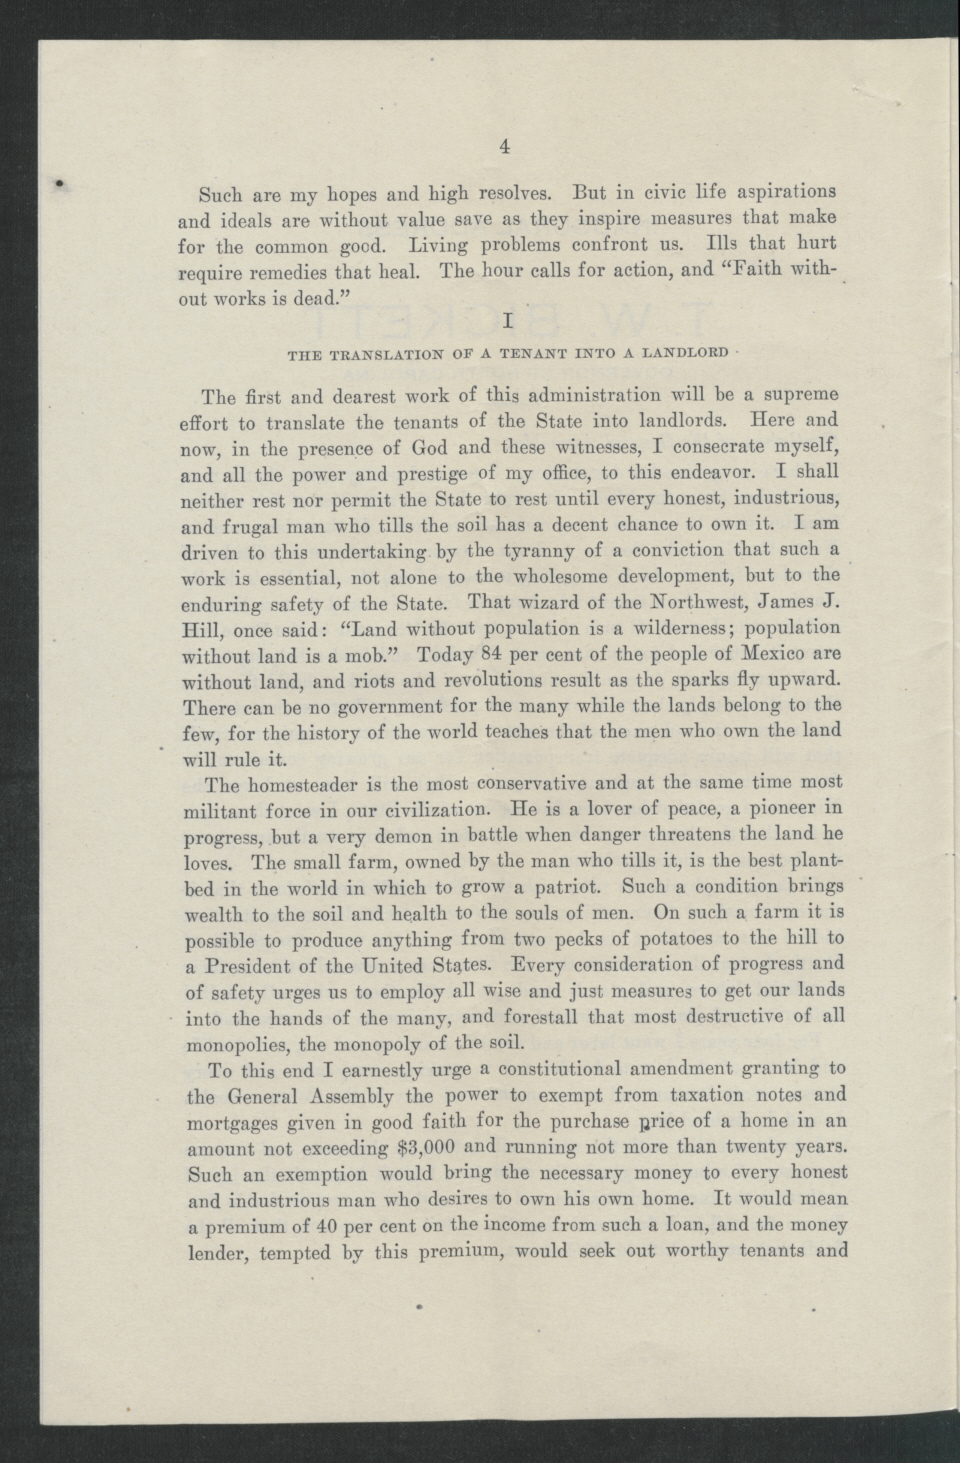 Inaugural Address of Governor Thomas W. Bickett to the General Assembly, January 11, 1917, page 2